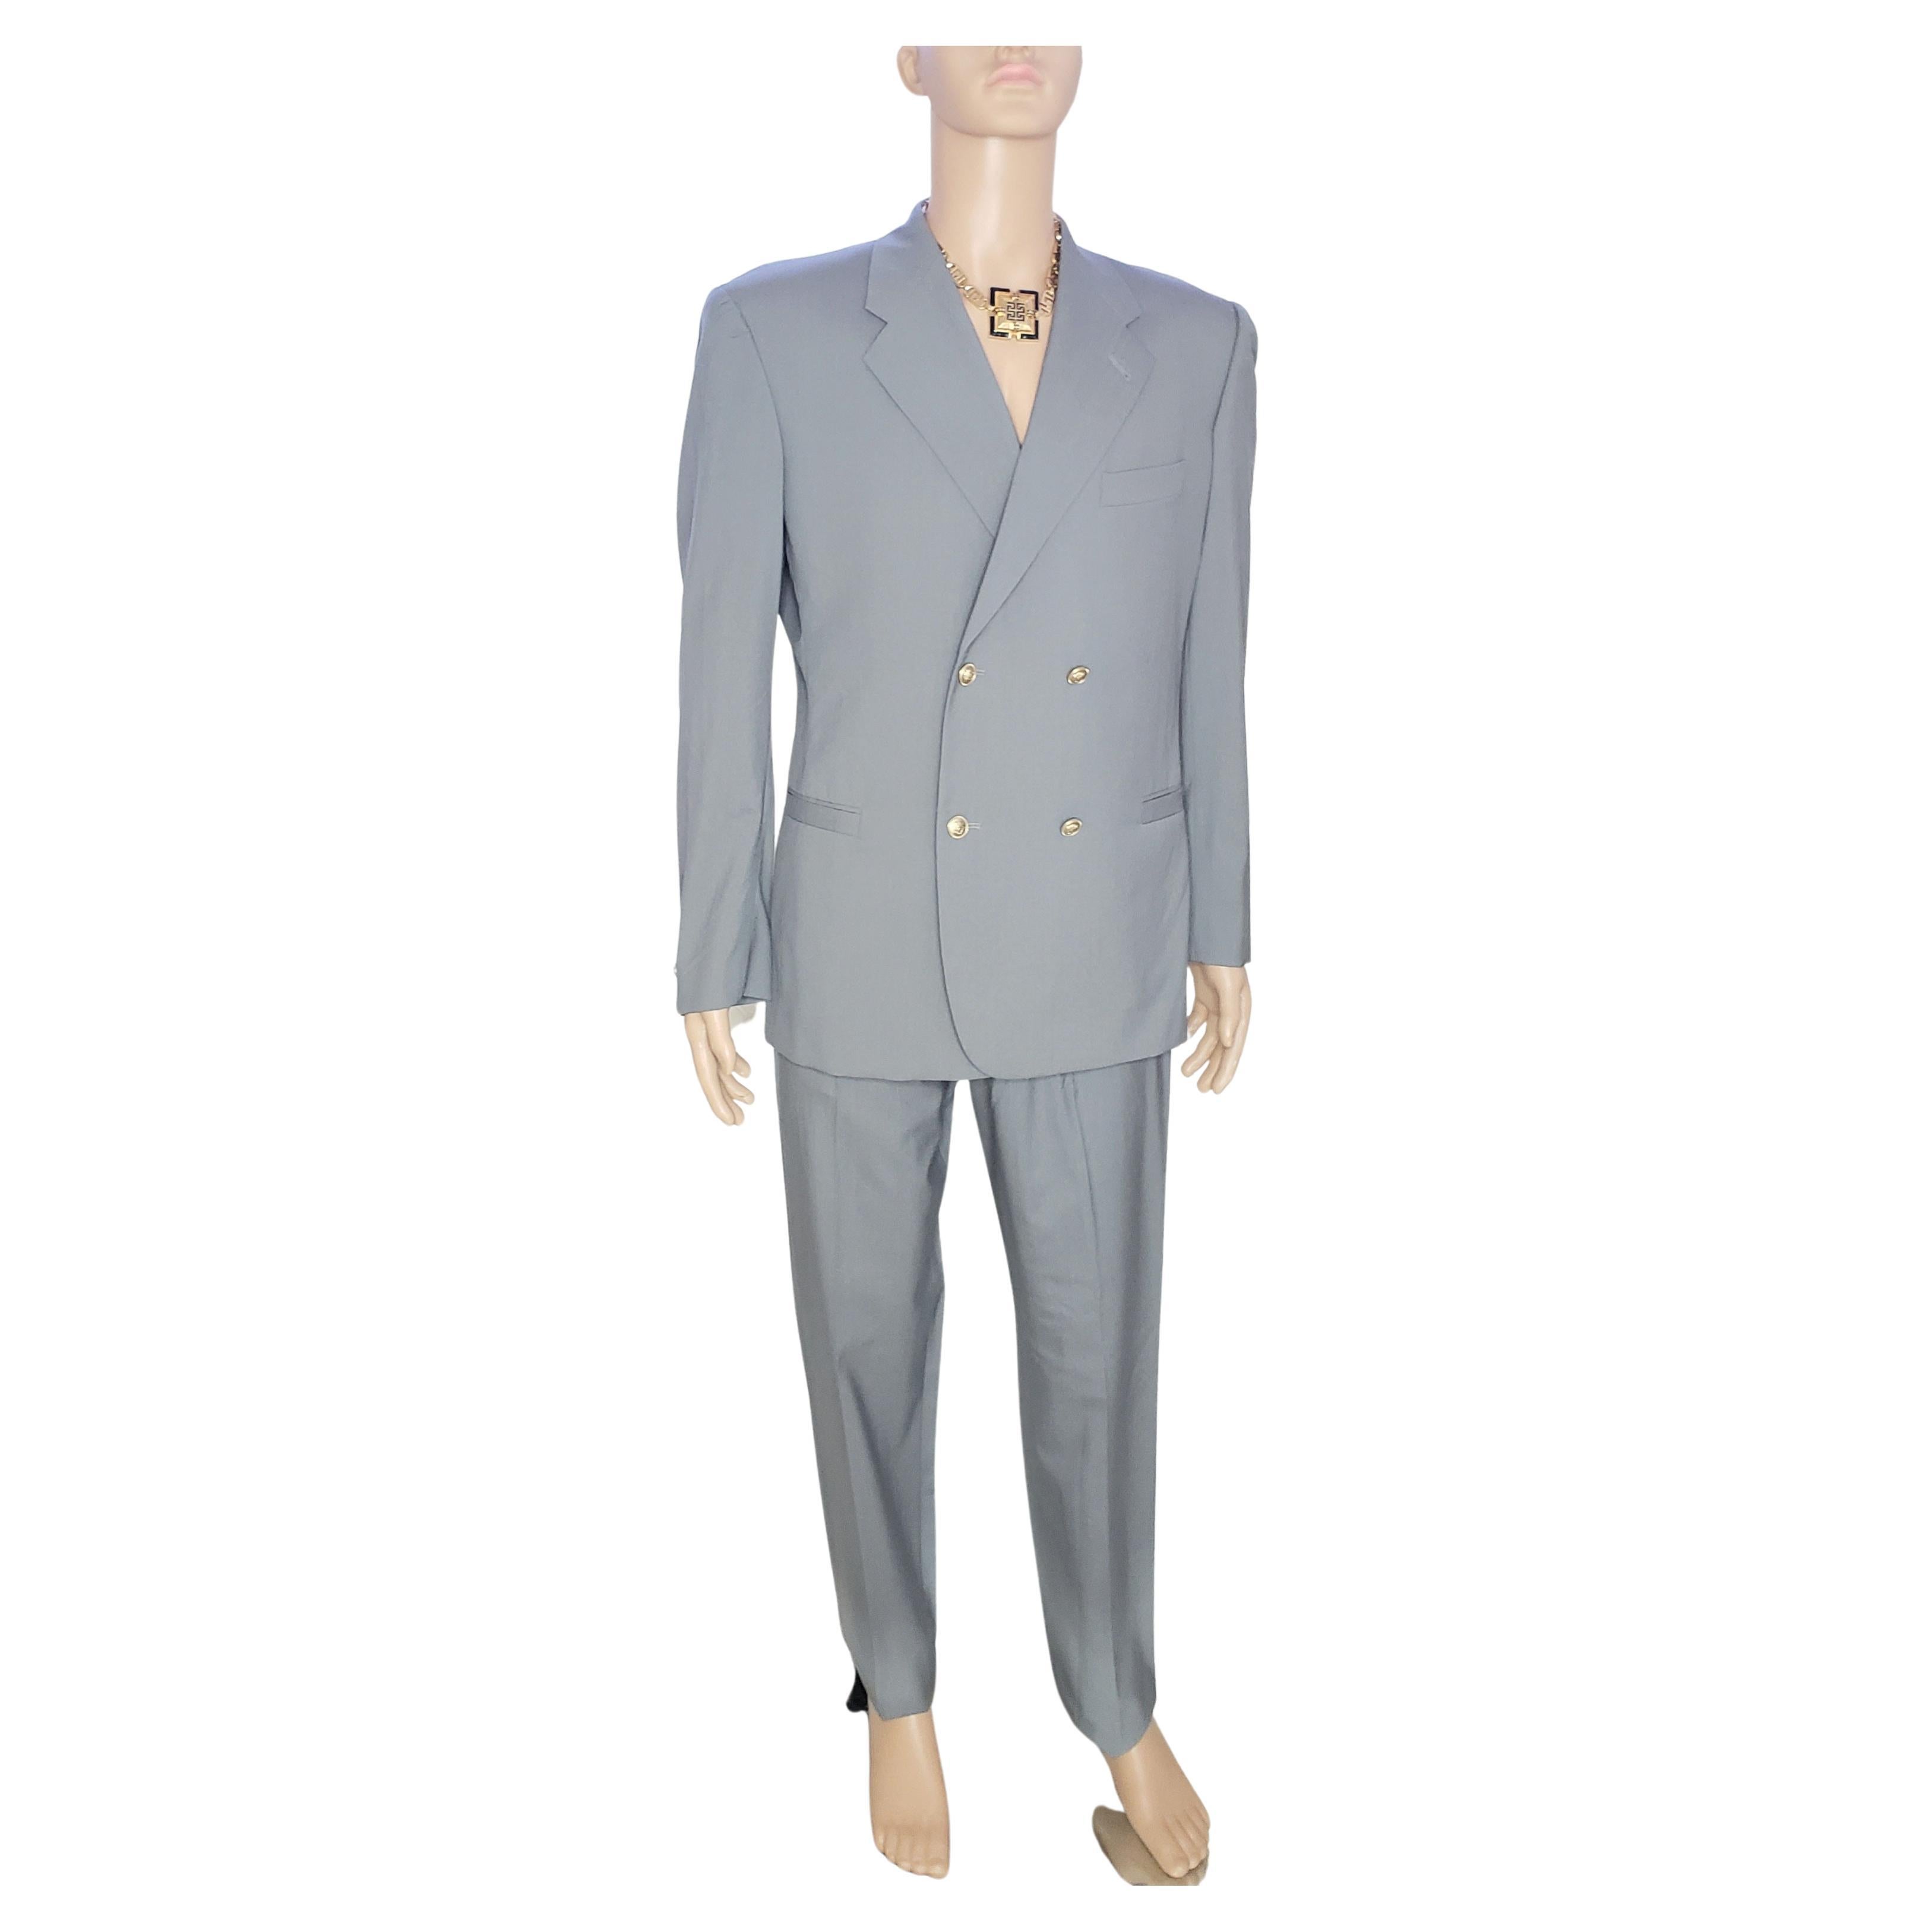 VERSACE S/S 2012 look # 30 BRAND NEW GRAY SUIT 48 - 38 (M) For Sale